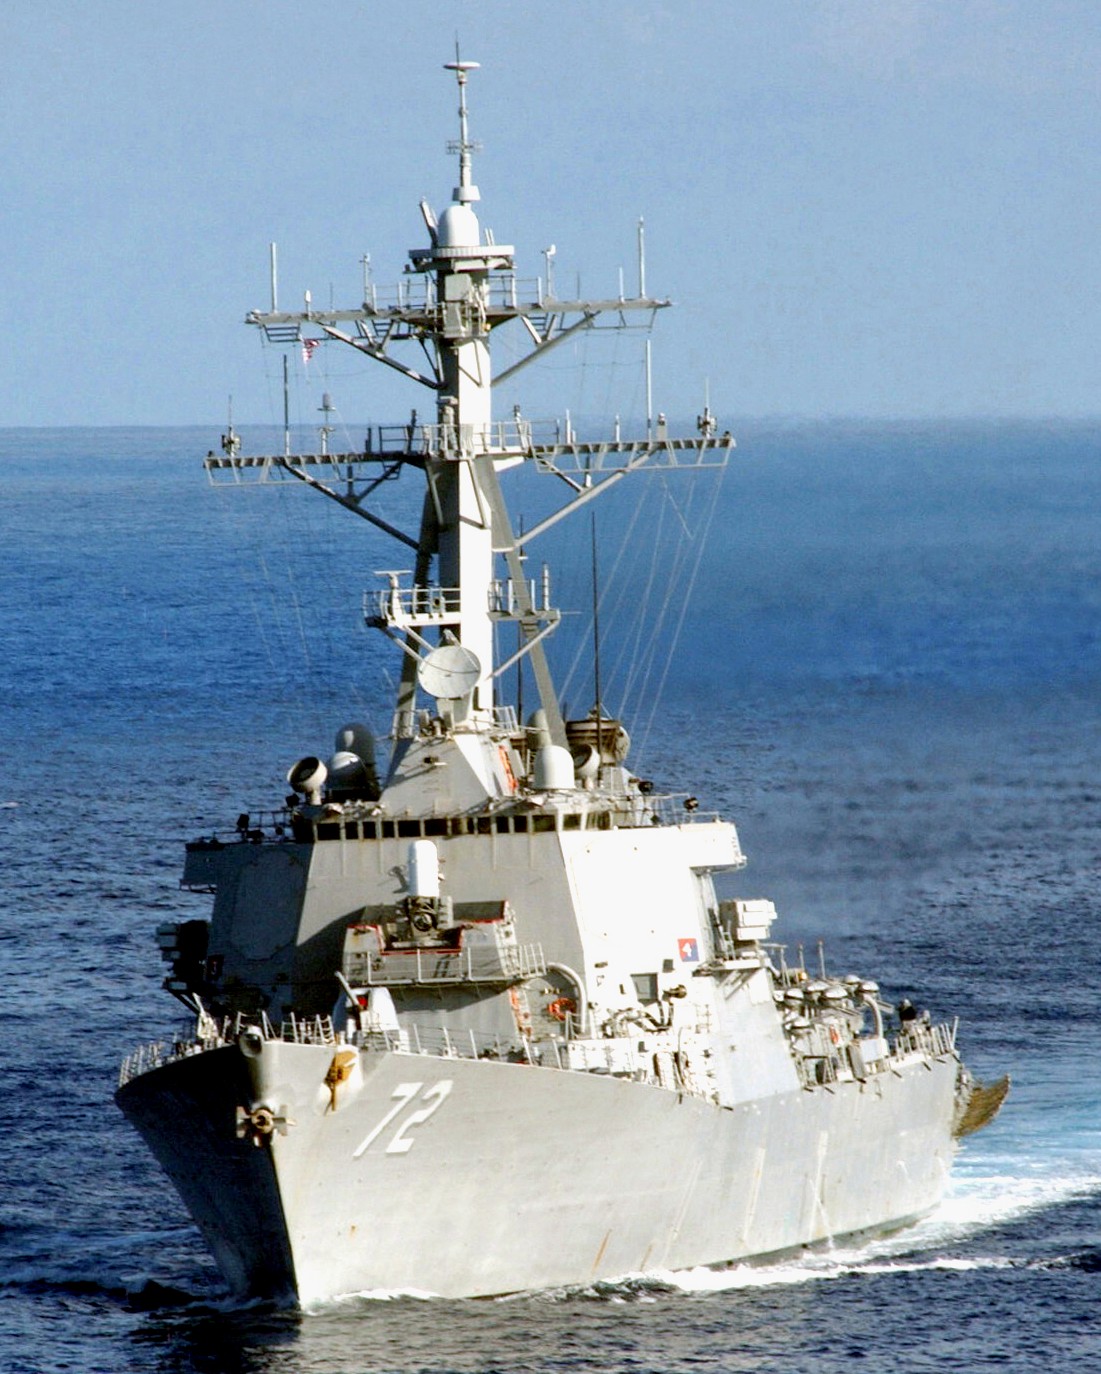 ddg-72 uss mahan guided missile destroyer arleigh burke class aegis bmd 42